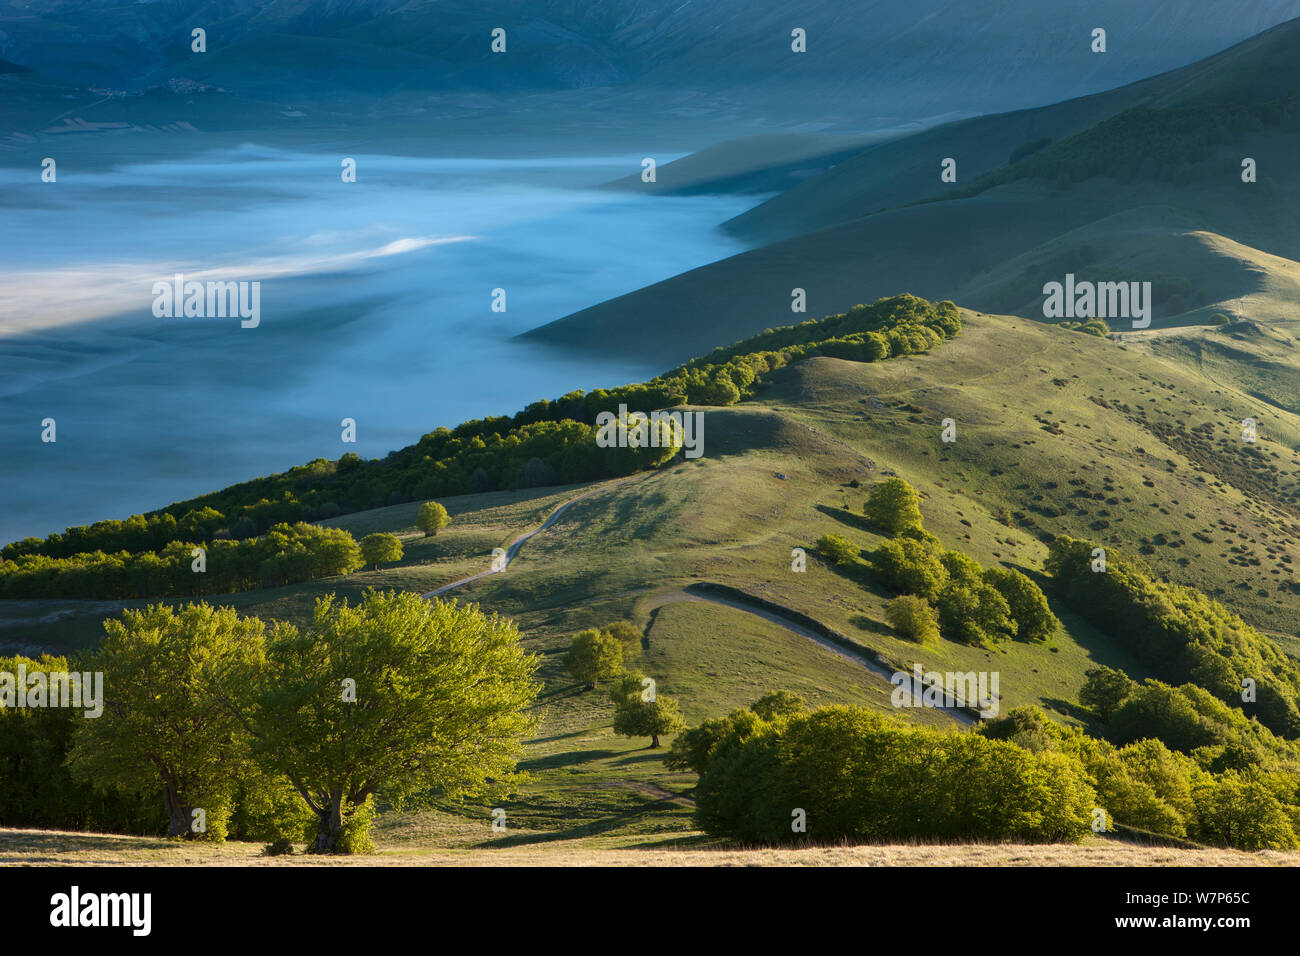 The Piano Grande at dawn with mist lying in the valley, Monti Sibillini National Park, Umbria, Italy May 2012 Stock Photo